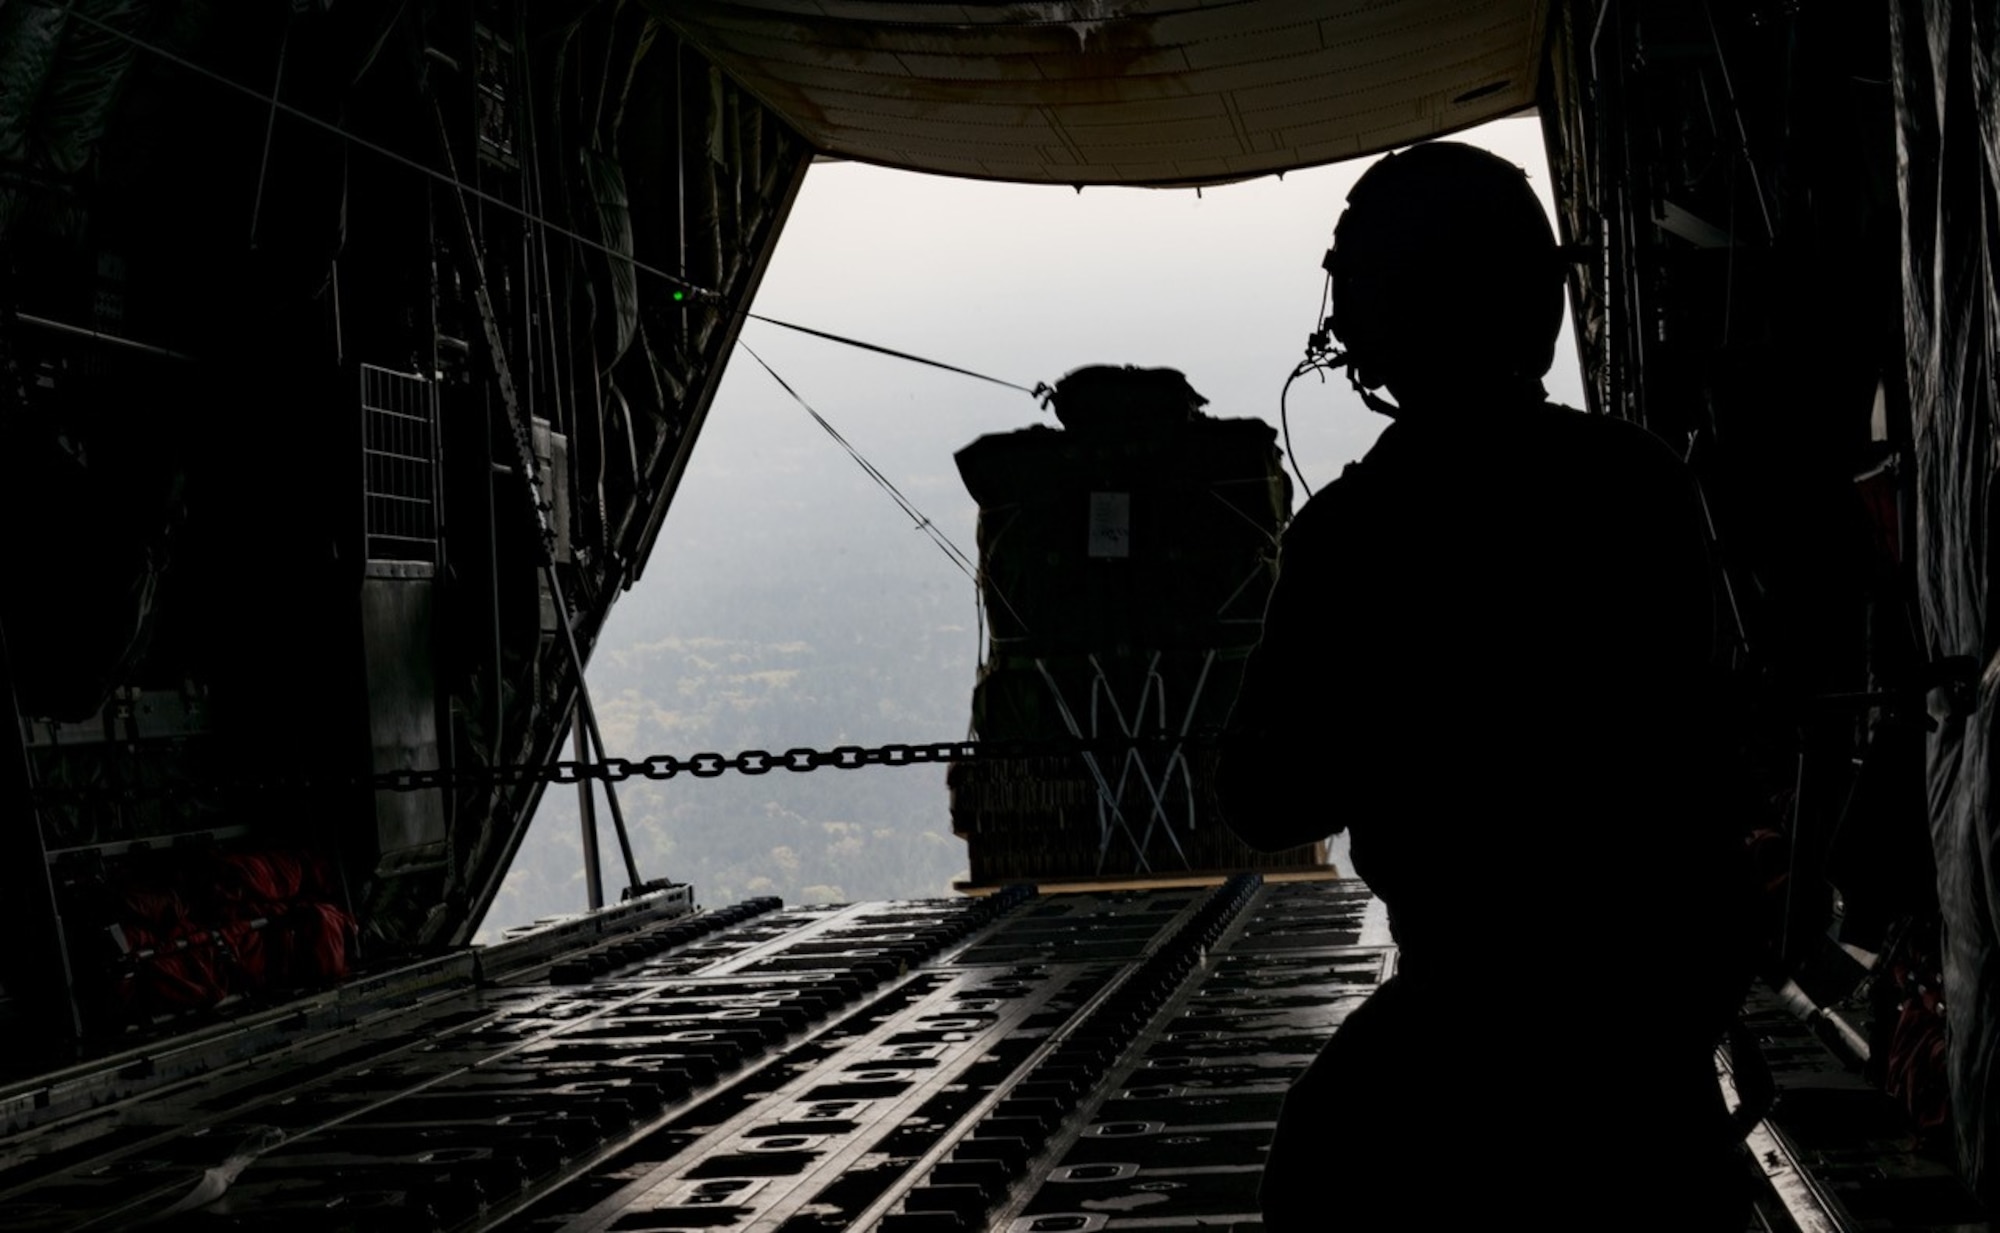 Tech. Sgt. Jonathan Packer, 815th Airlift Squadron, drops a package from a C-130J Super Hercules aircraft during the Green Flag Little Rock 17-05 exercise March 19 in Alexandria, Louisiana. The exercise provided training in a deployment simulation. (U.S. Air Force photo/Staff Sgt. Shelton Sherrill)